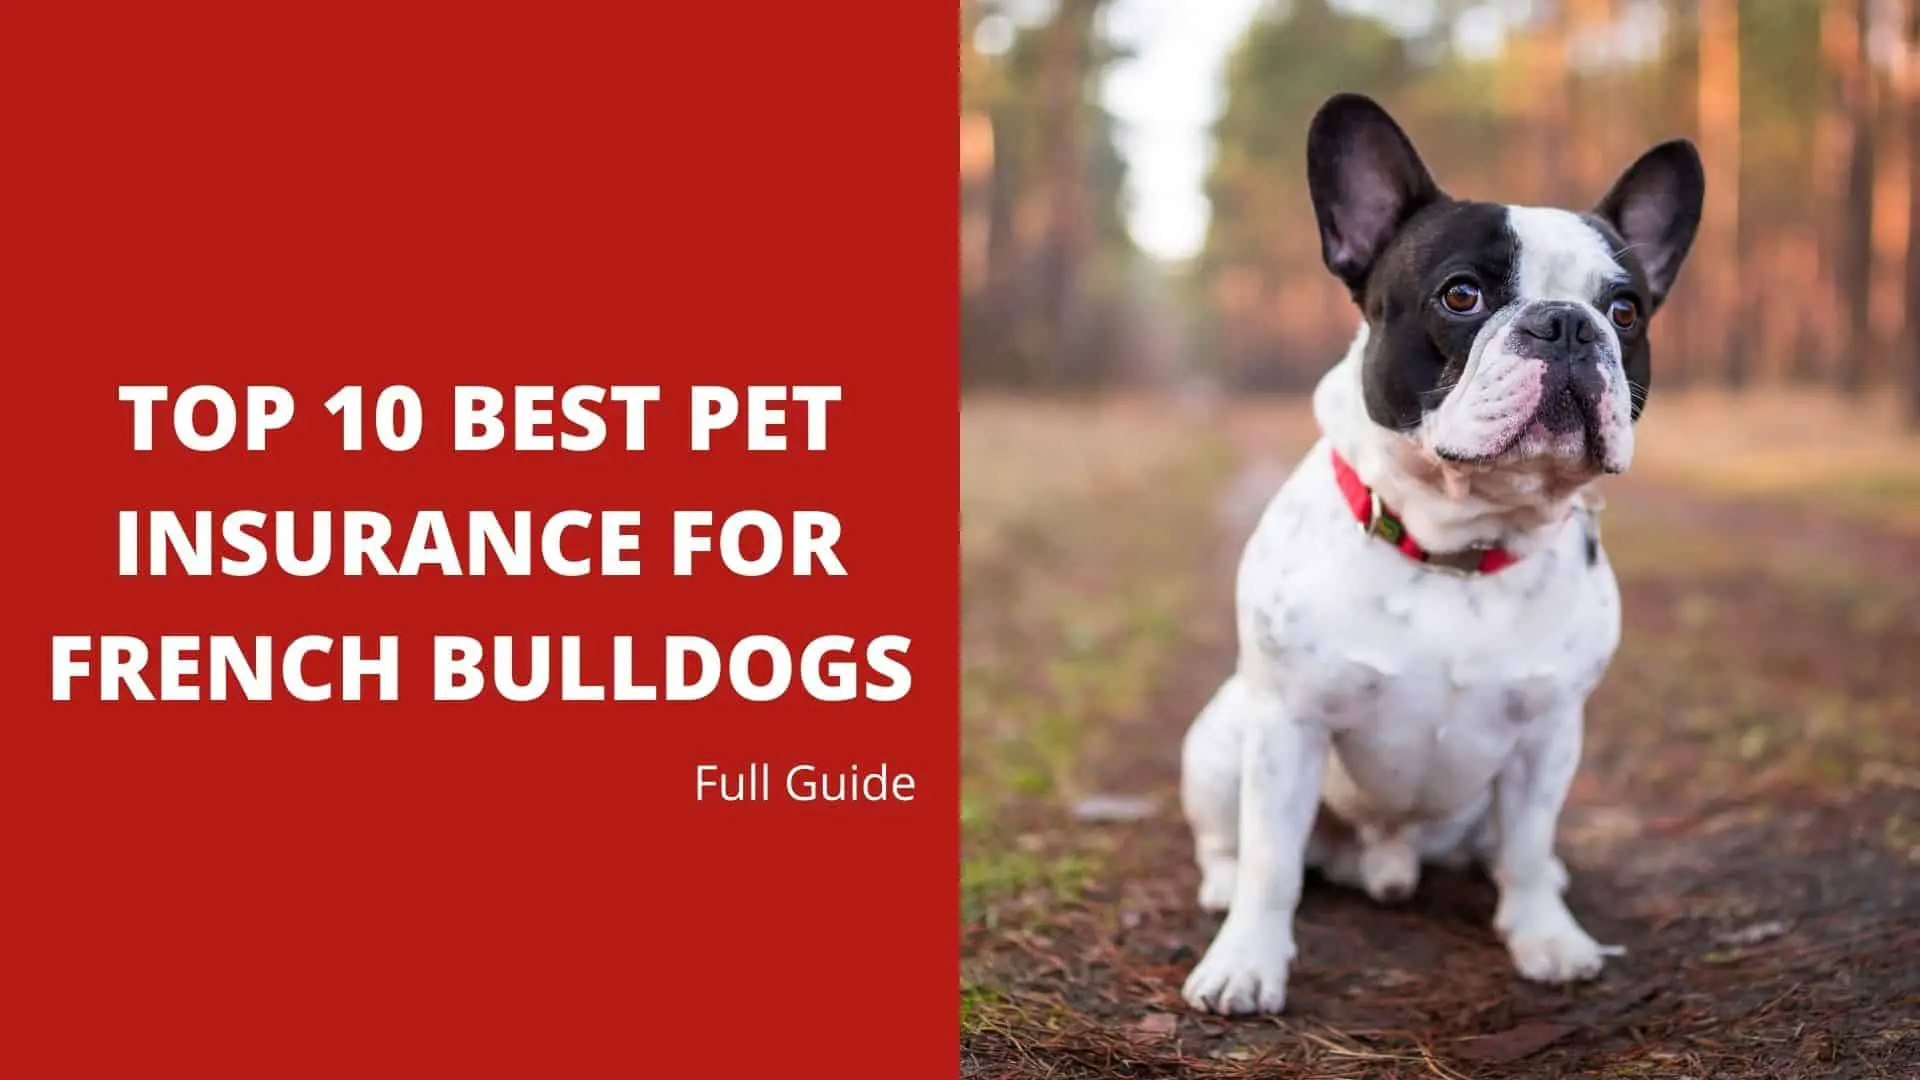 Top 10 Best Pet Insurance For French Bulldogs 2022 – Full Guide